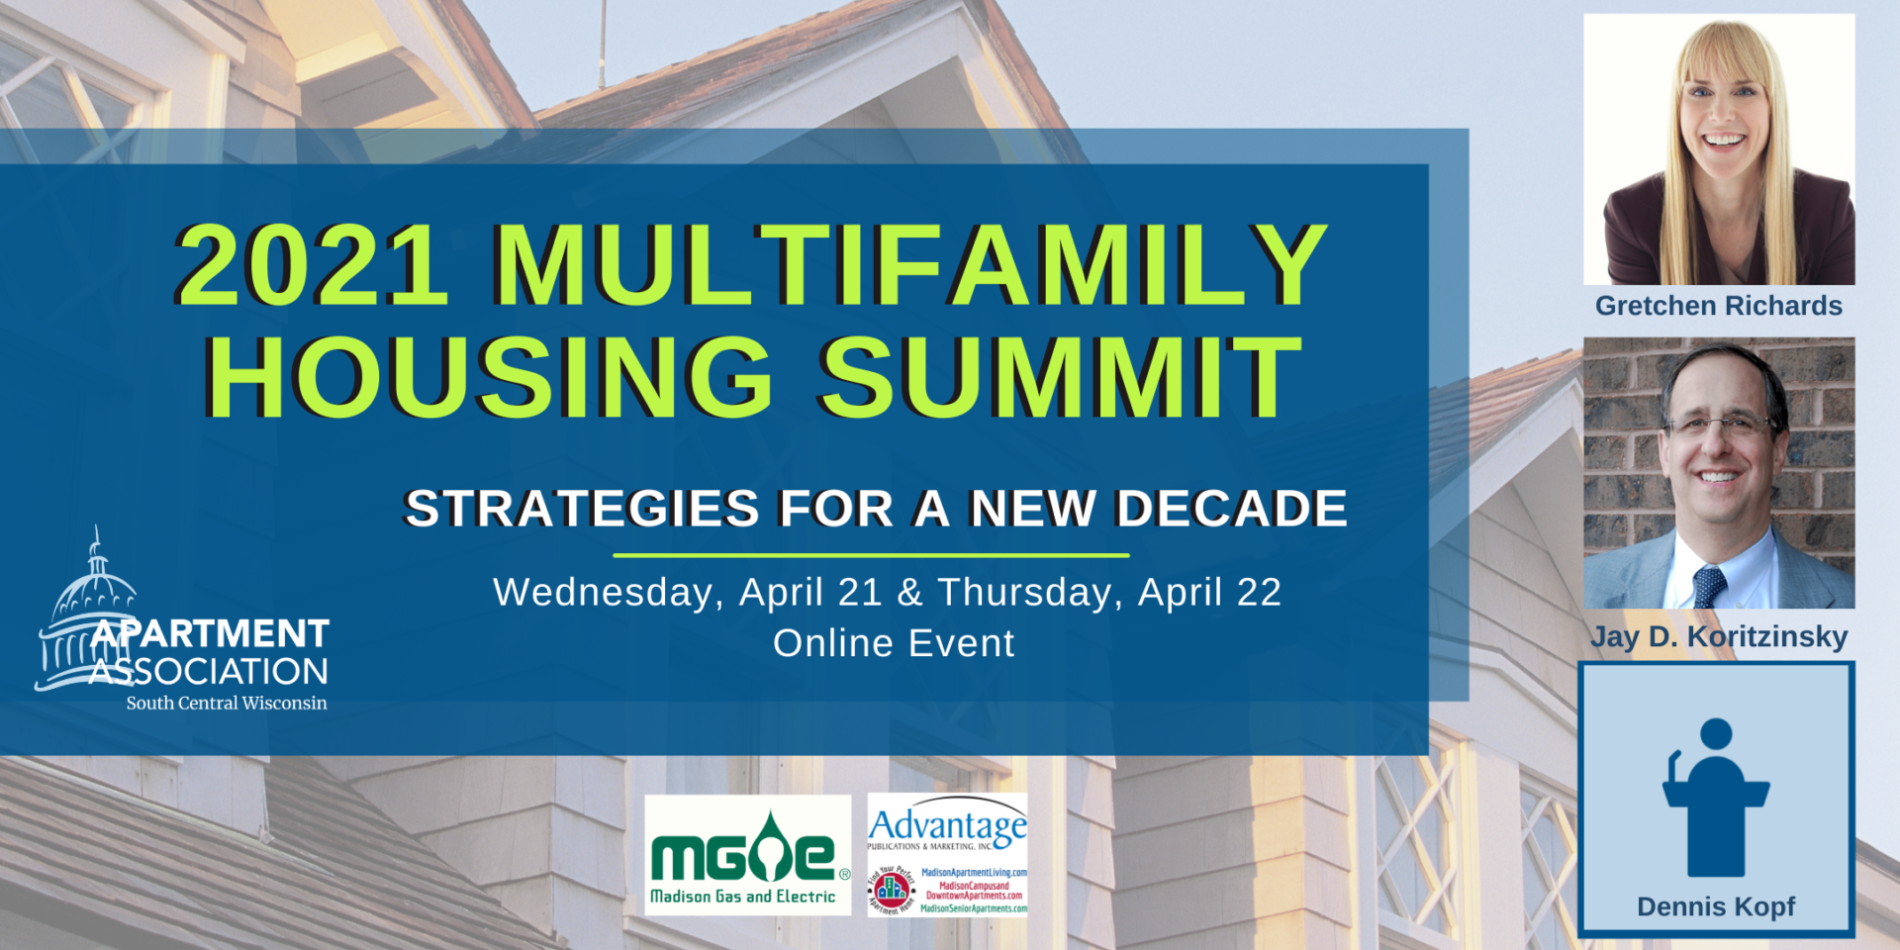 2021 Multifamily Housing Summit Apartment Association of South